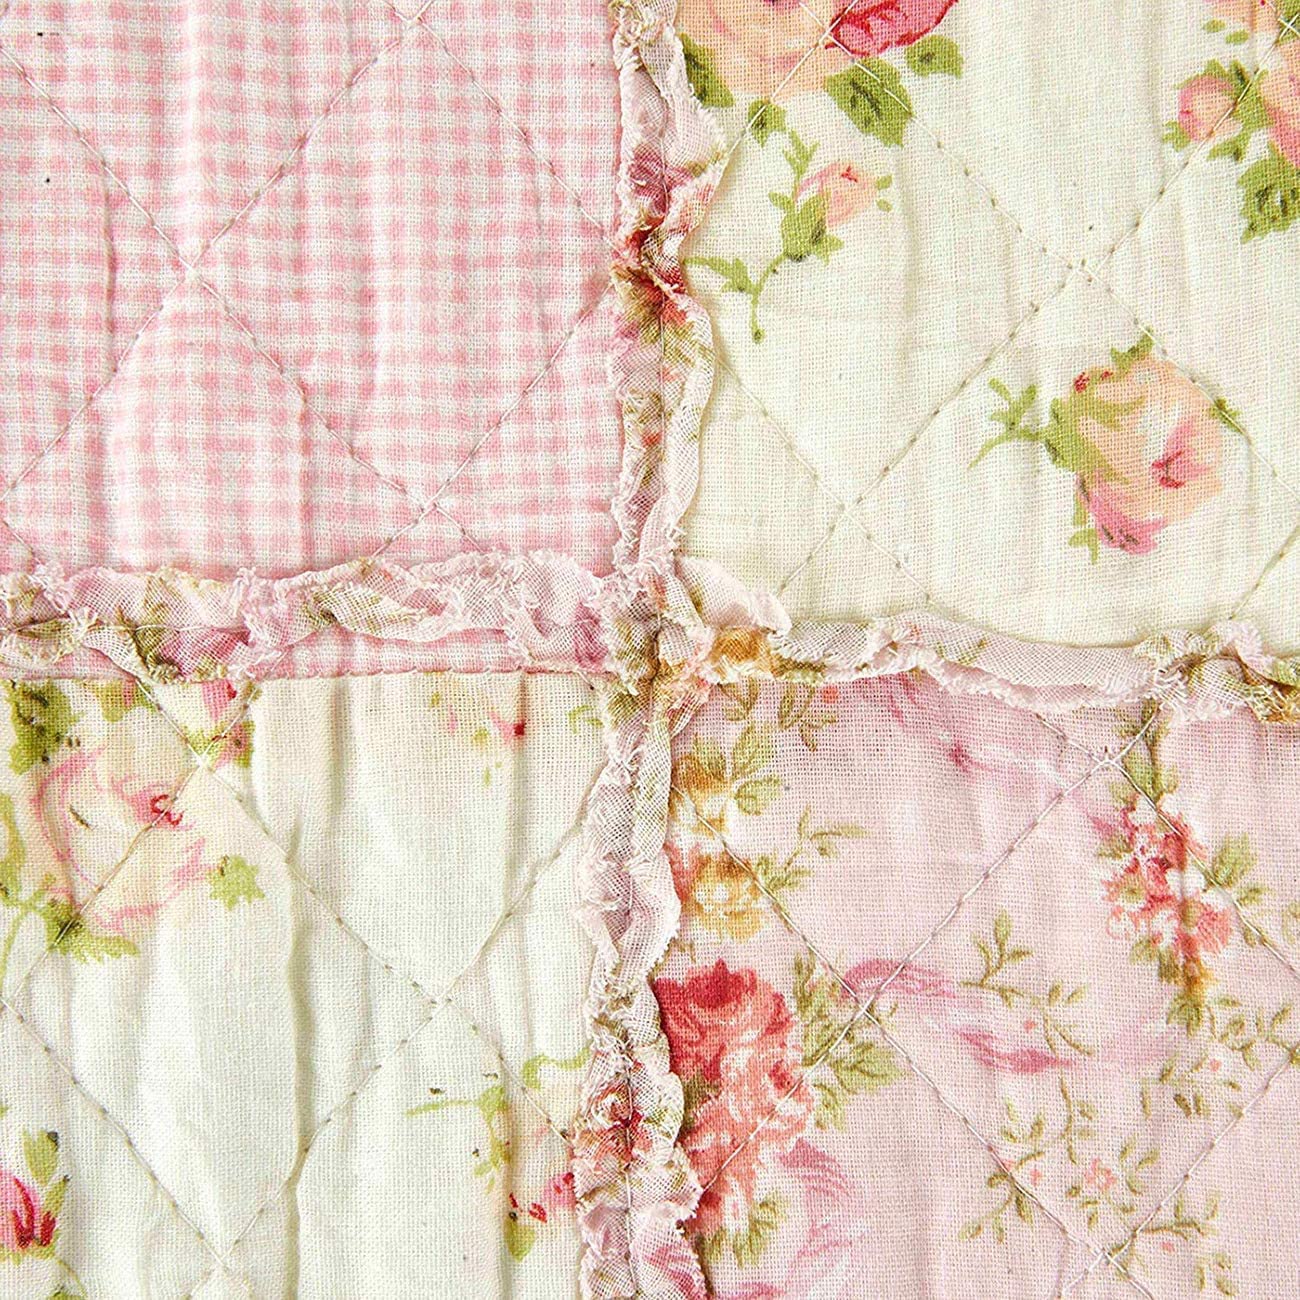  Reaowazo Qucover Pink Floral Quilted Blanket 100% Cotton Floral  Patchwork Quilts Single Bedspread Throw for Couch Beds 59x79 Inch : Home &  Kitchen